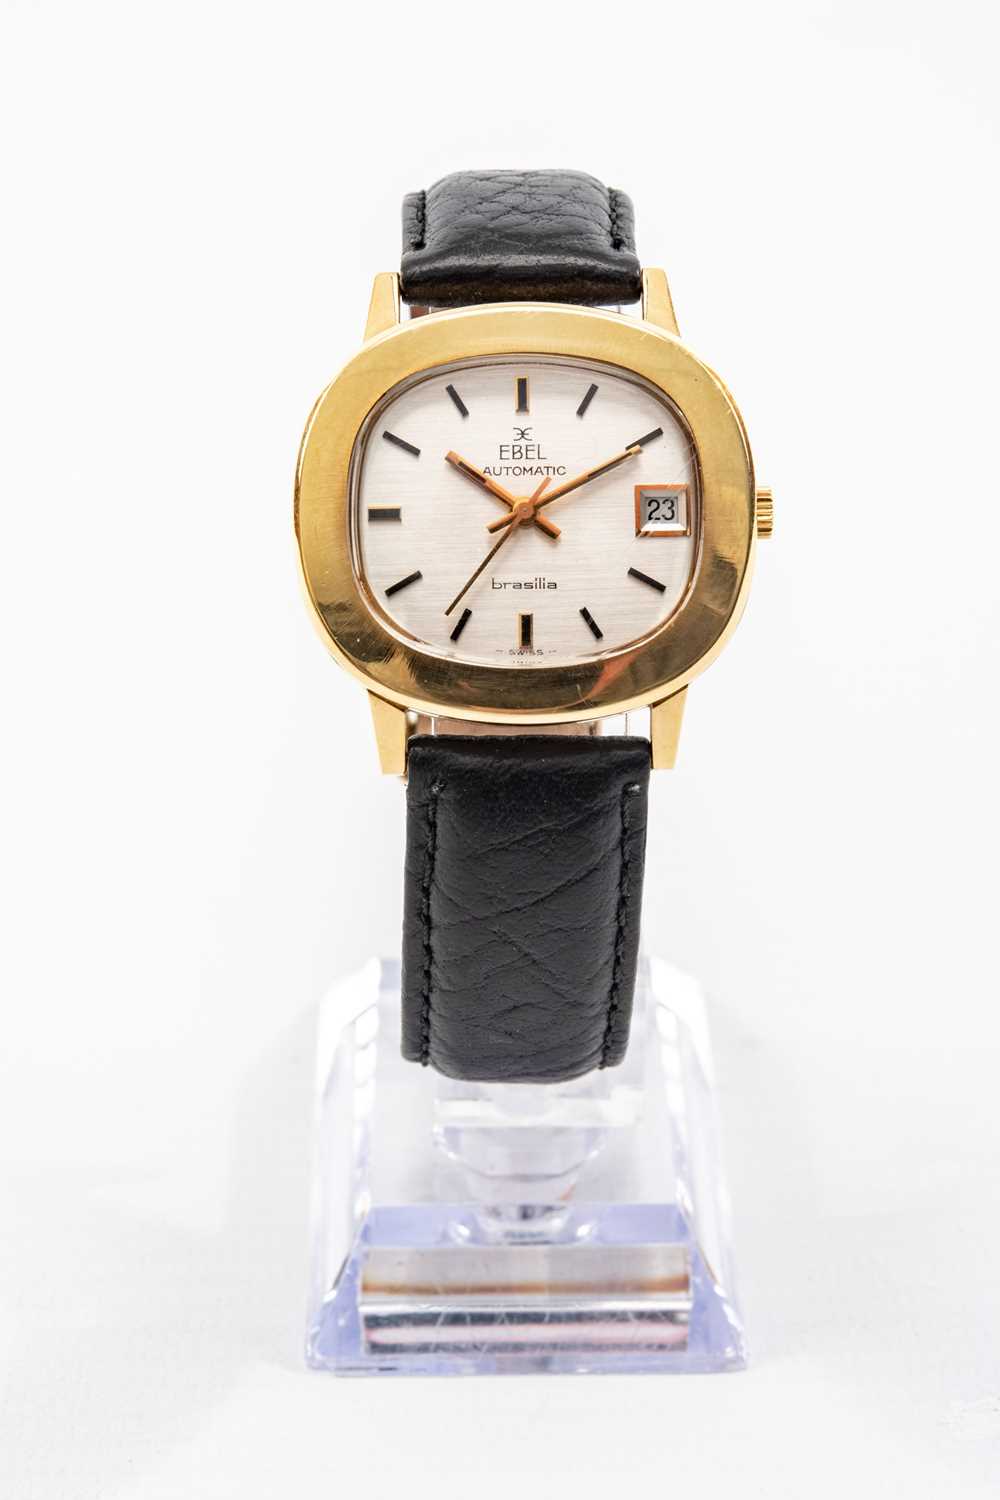 VINTAGE EBEL 18K GOLD BRASILIA WRISTWATCH, ref. 353, automatic movement stamped 322 with brushed